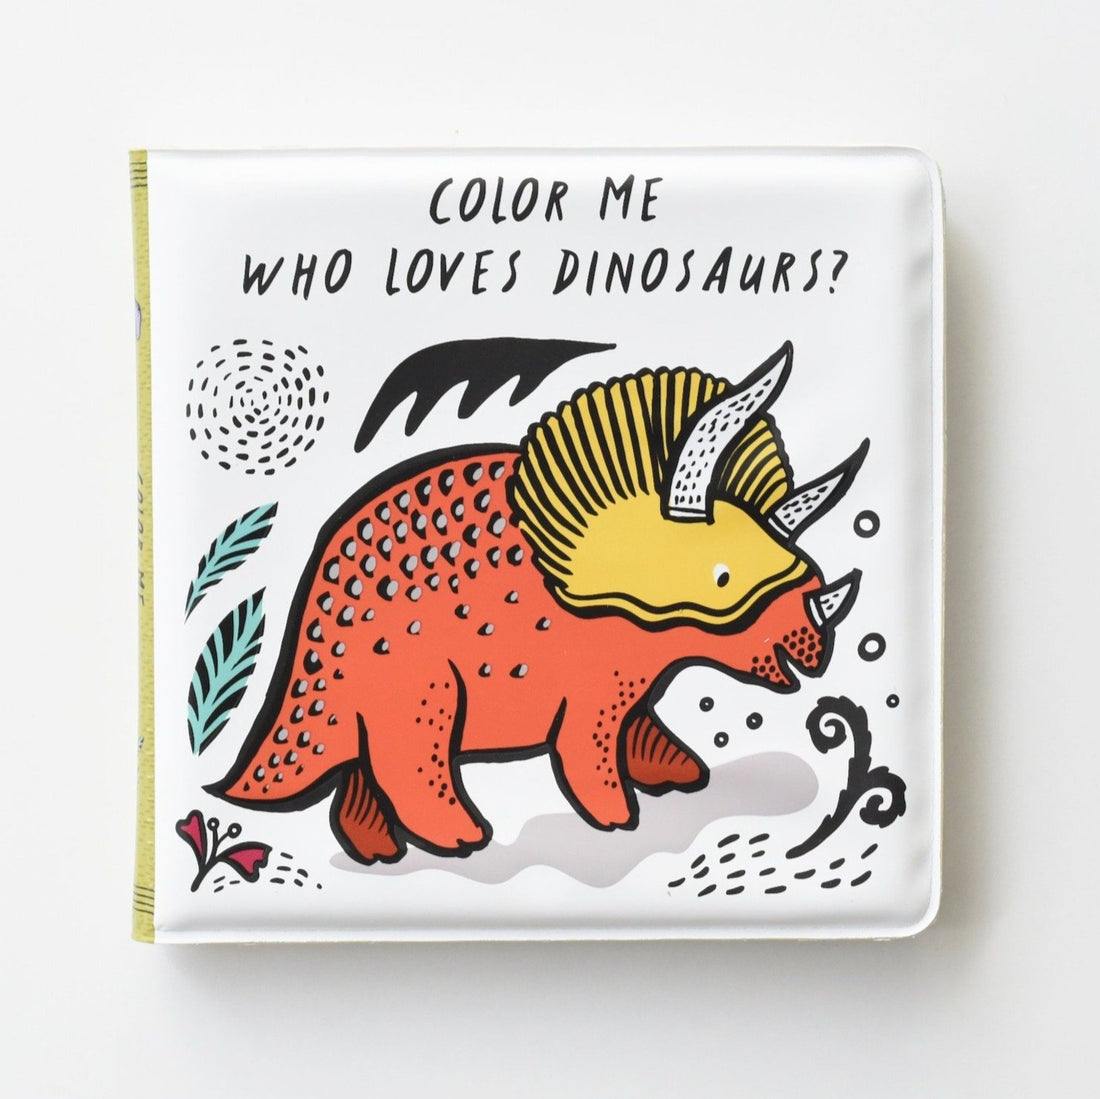 Color Me: Who Loves Dinosaurs